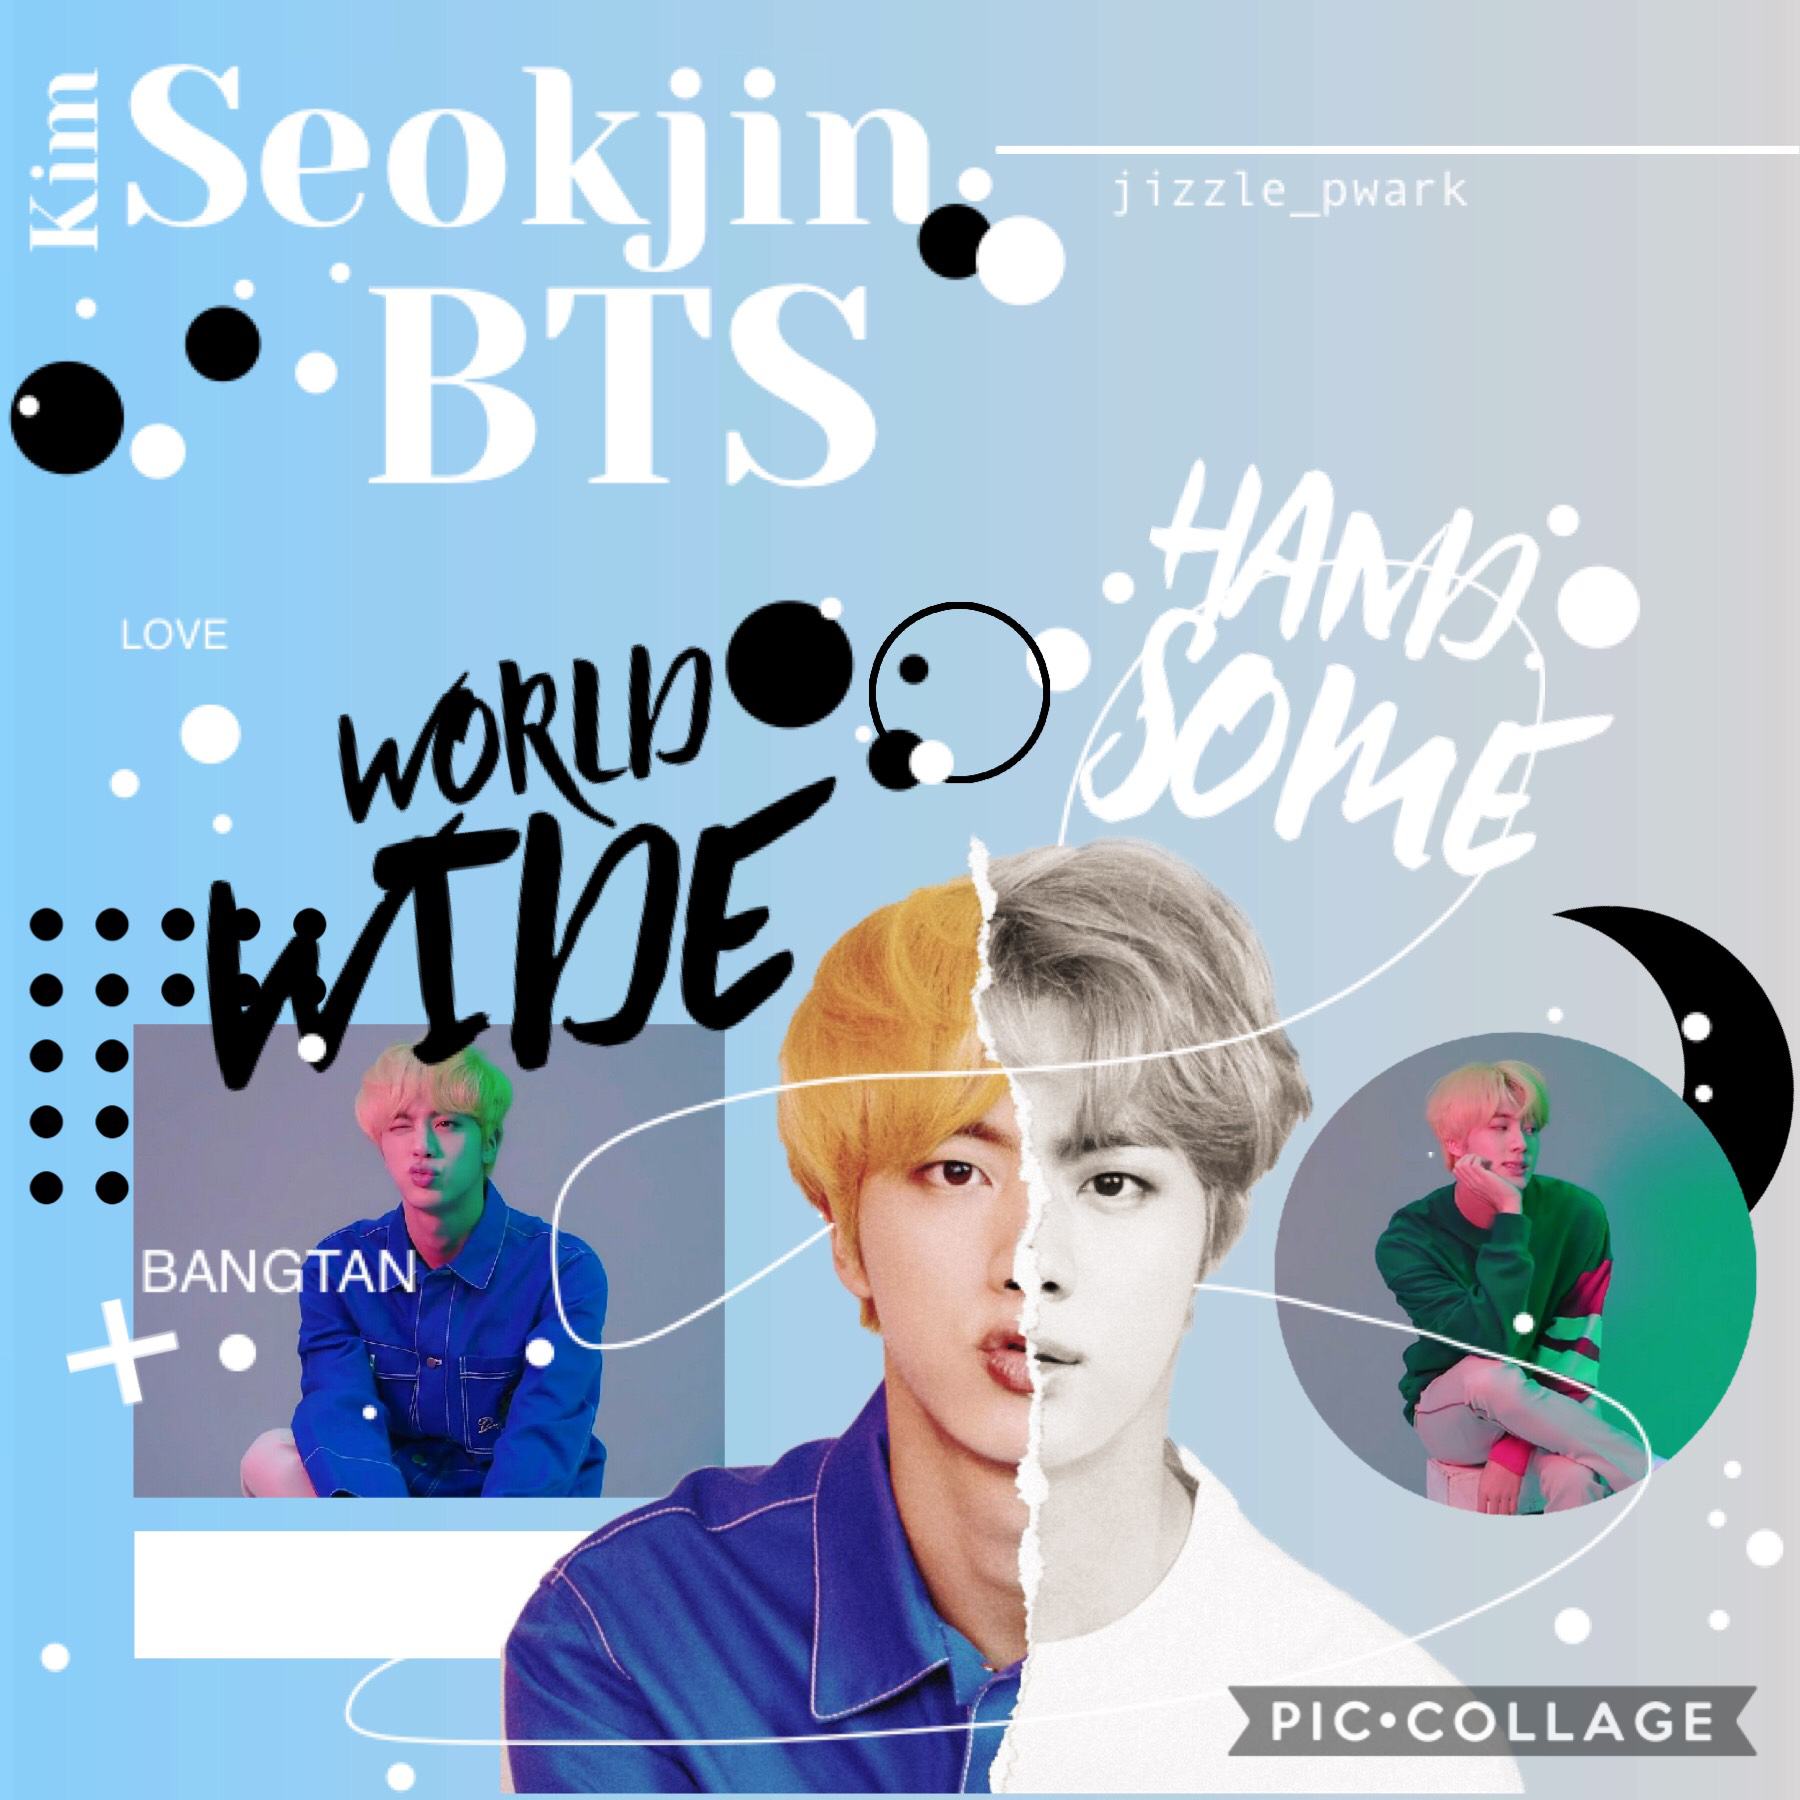 Inspired by:
rose_panda
Ugh! I’m so late for birthday collages 😭 I’m so sorry Jin...